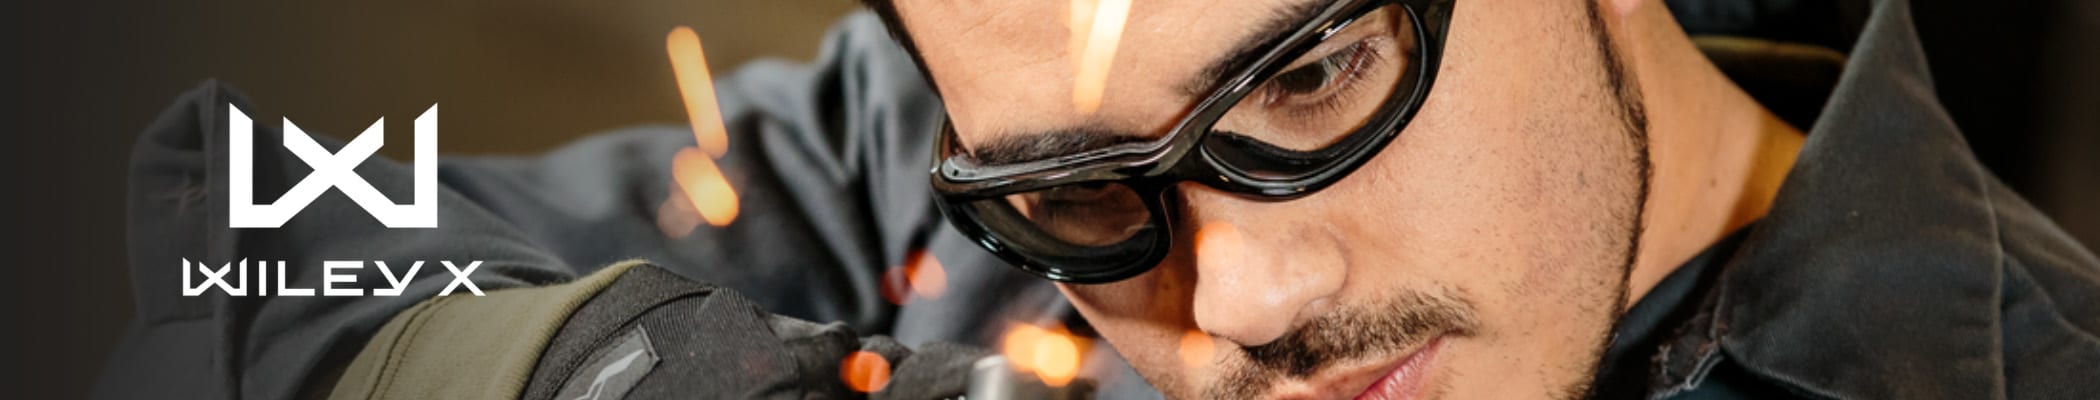 Shop Wiley X Goggles Sunglasses - featuring Spear